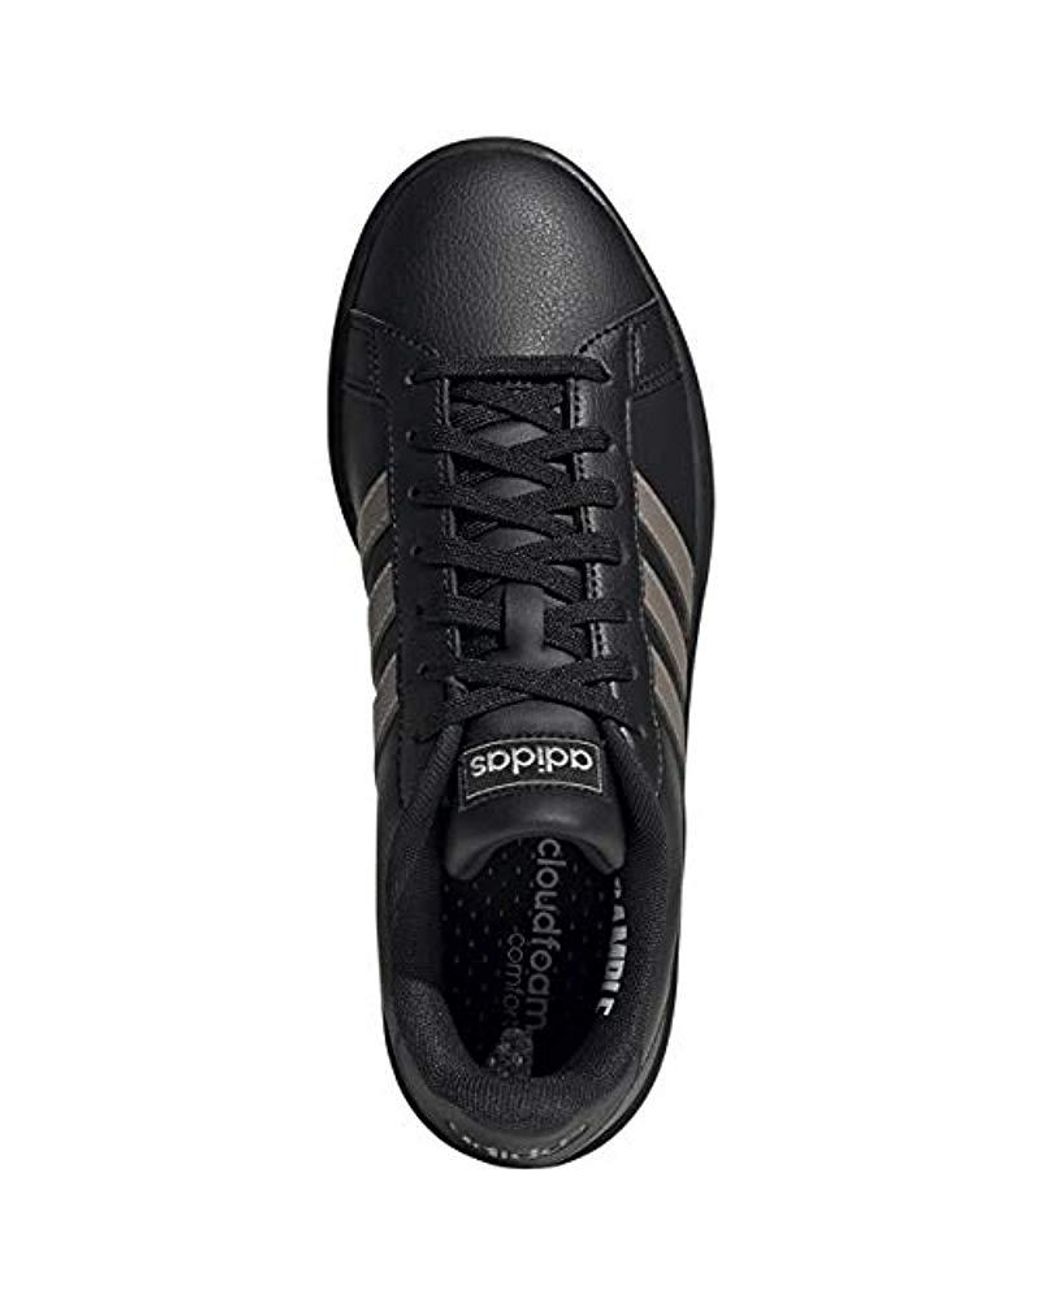 adidas Grand Court Shoes in Black | Lyst